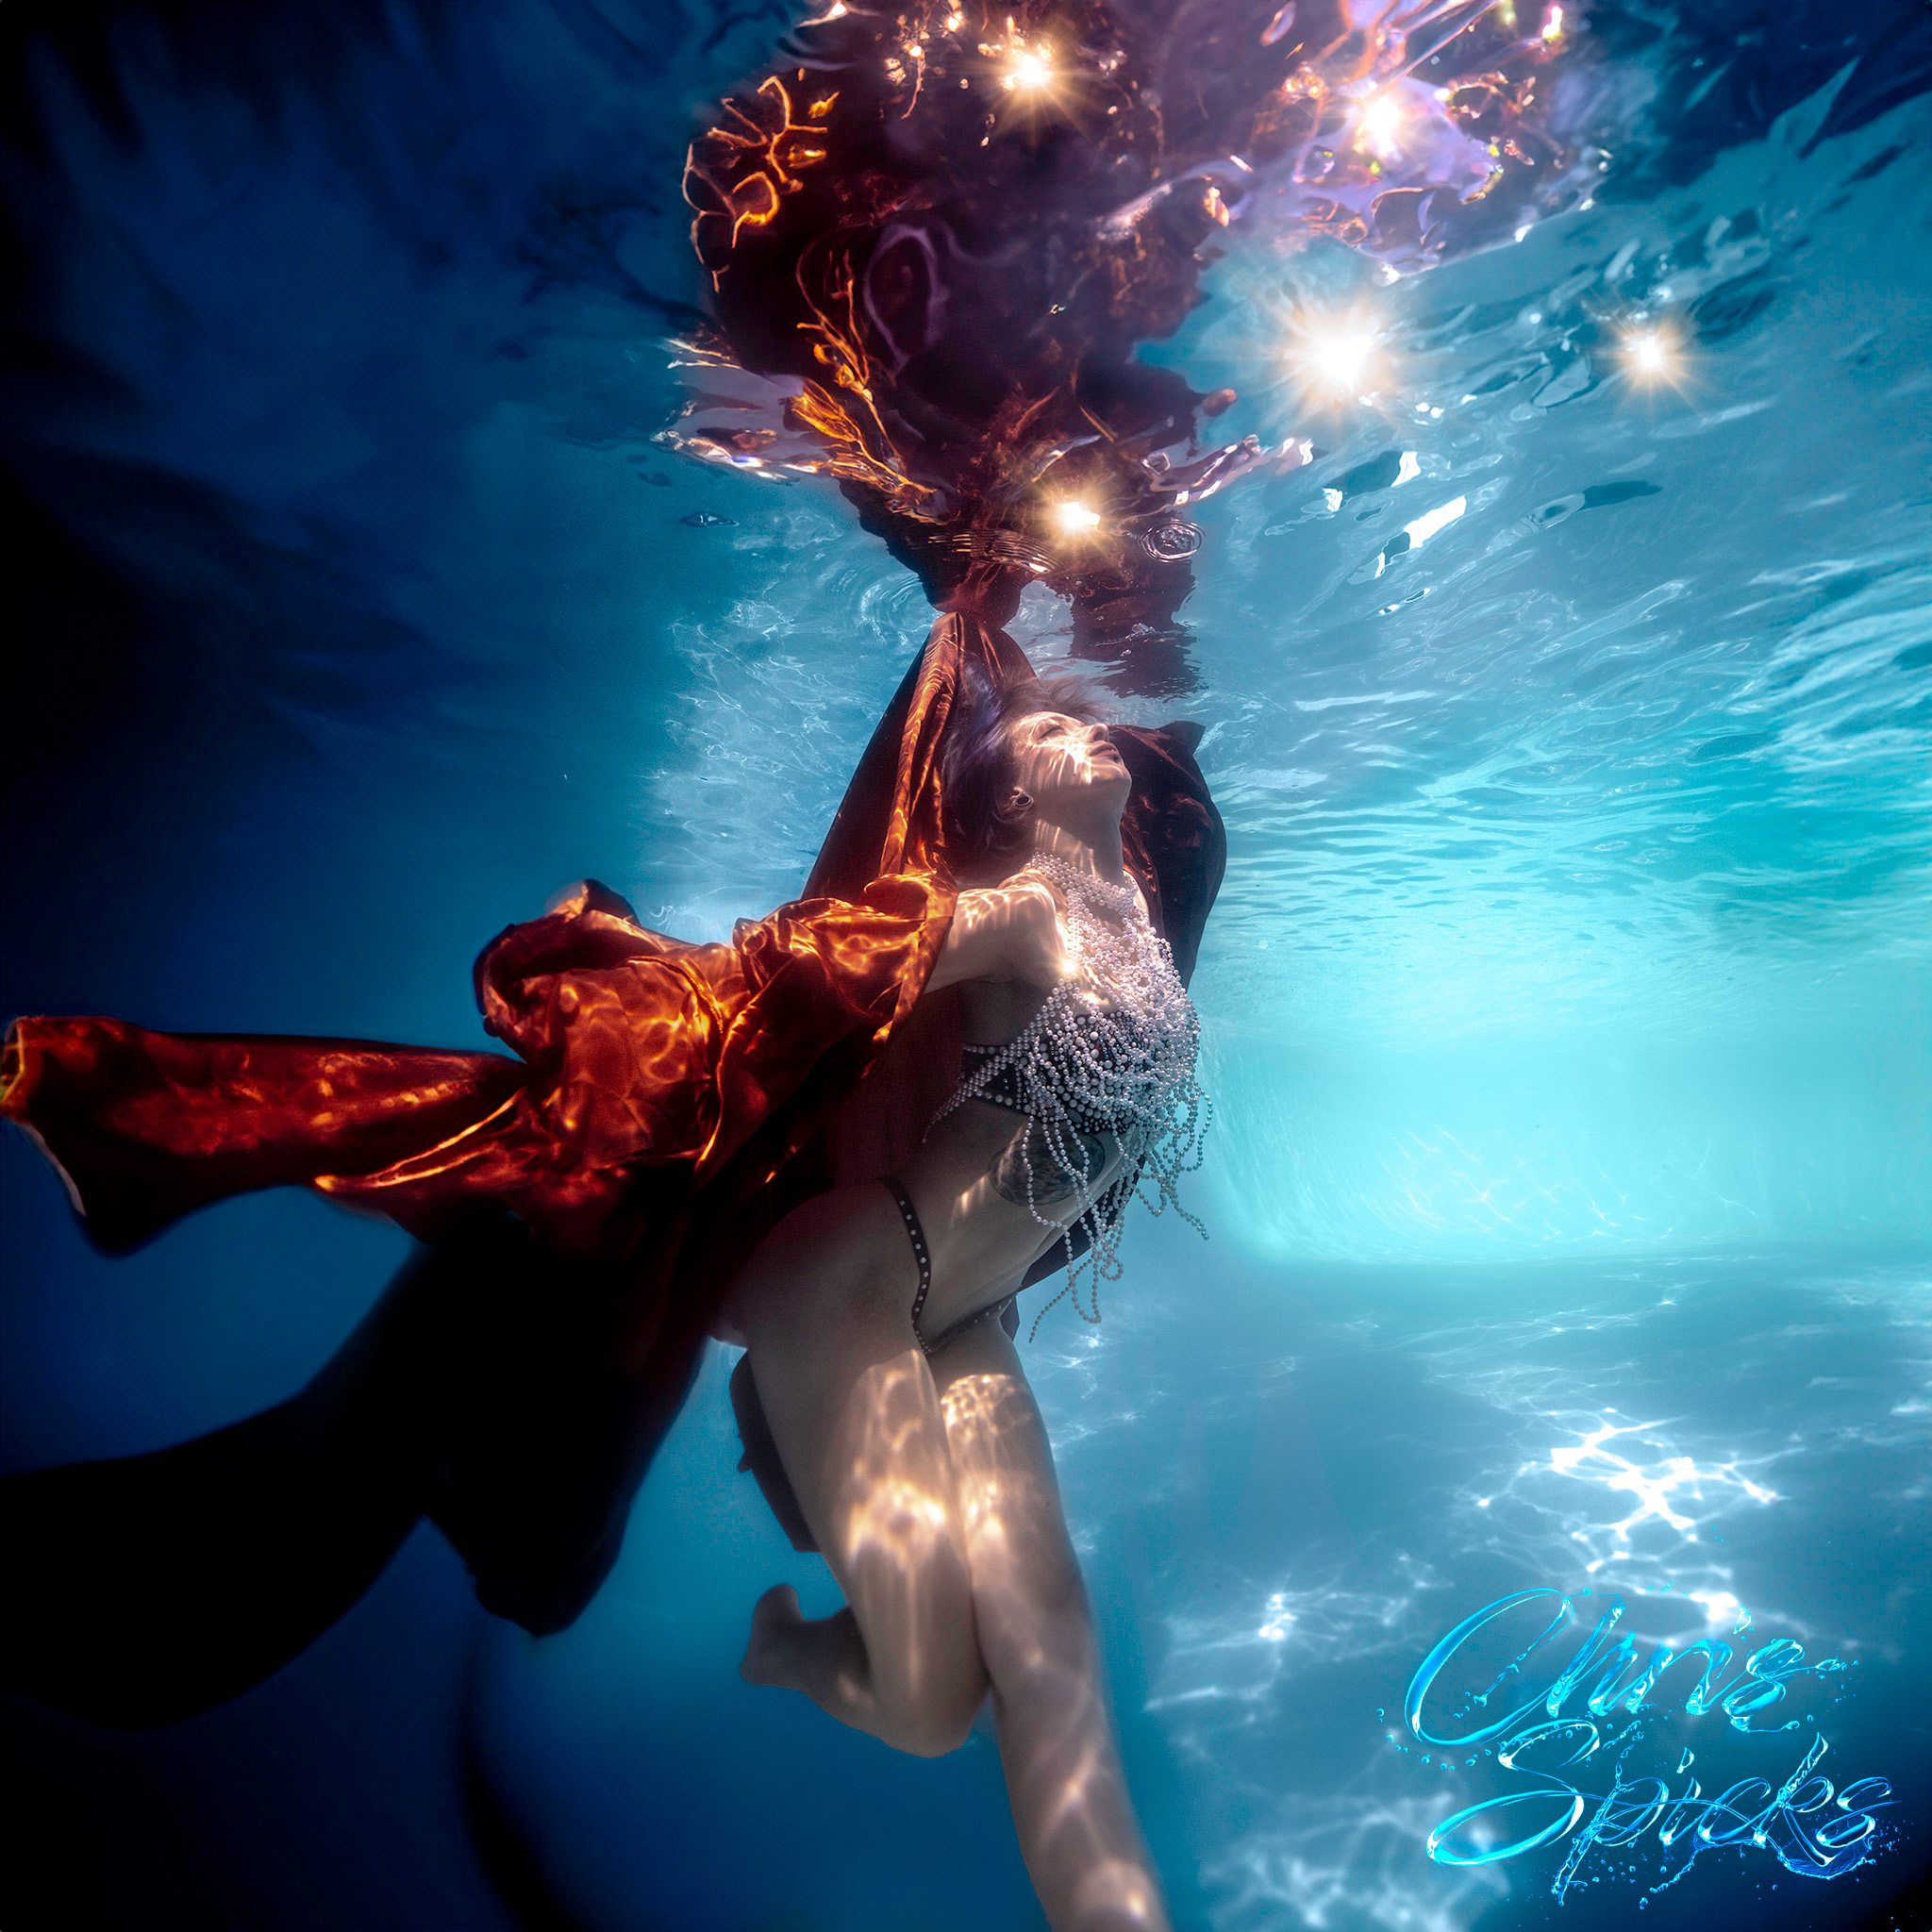 A person underwater in a revealing outfit and ornate headgear, reaching upward with a glowing object. The water reflects pale yellow lights below and blue hues around. "Omer Sipahi" text in the corner.